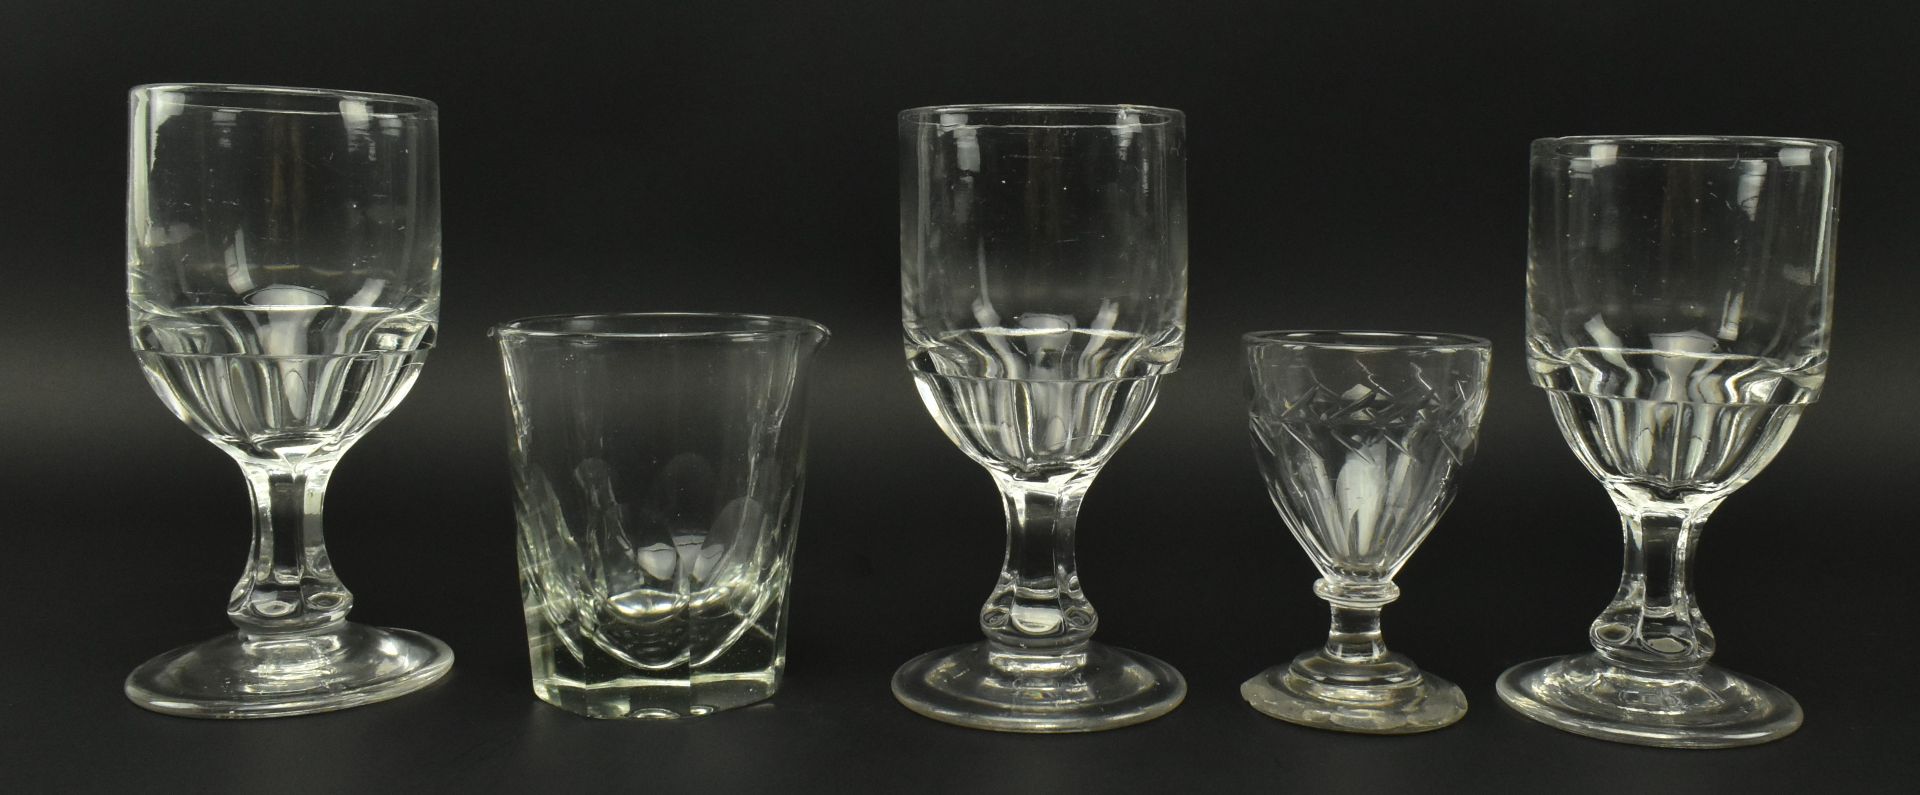 COLLECTION OF 19TH CENTURY CUT GLASSWARE